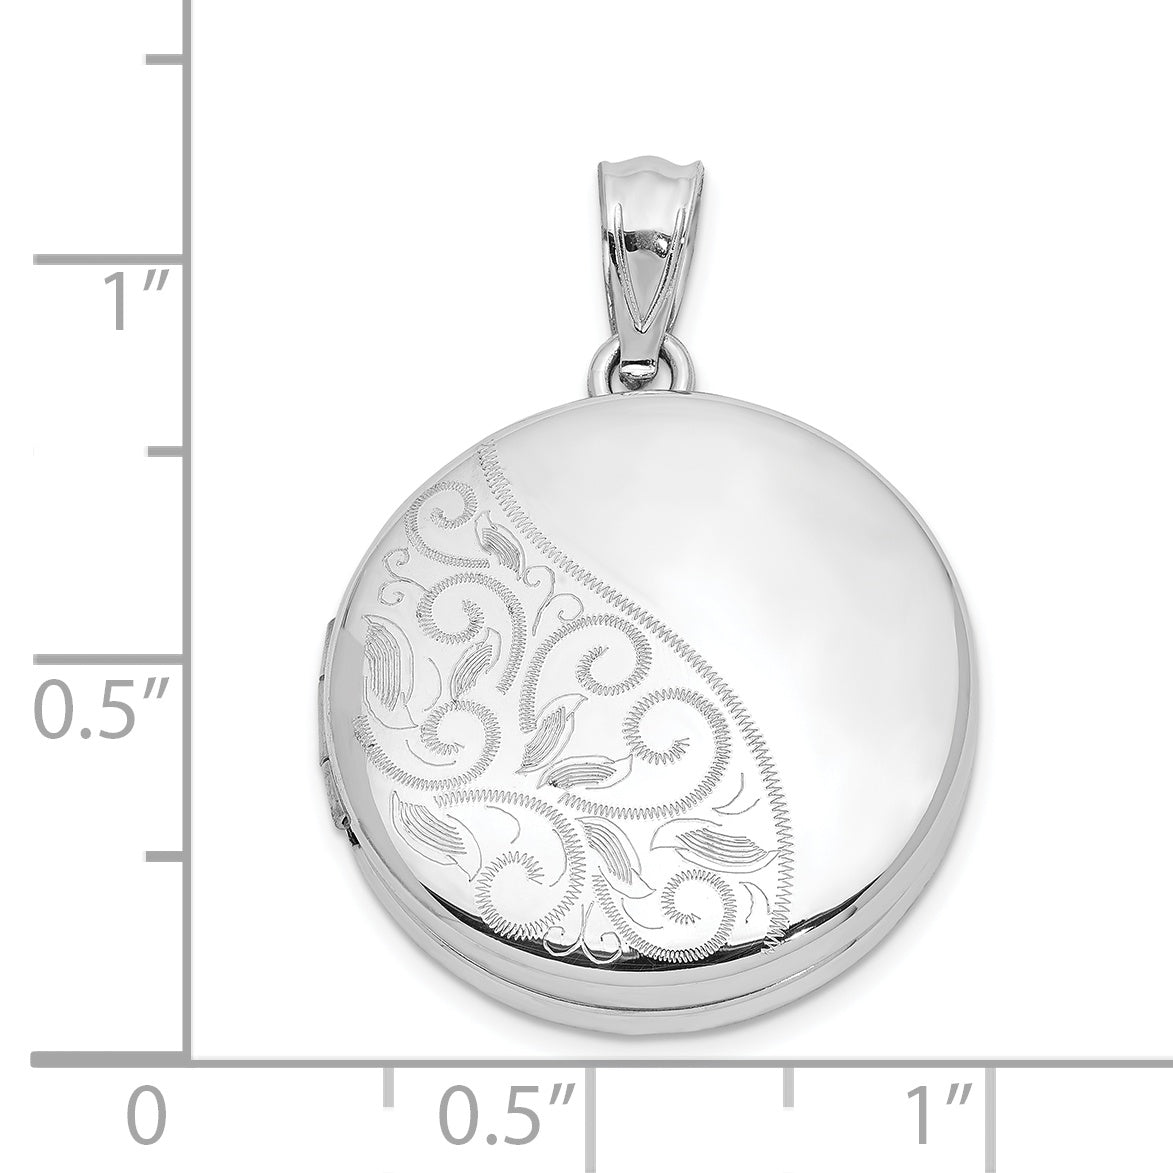 Sterling Silver Rhodium-plated 20mm Polished Scrolled Round Locket